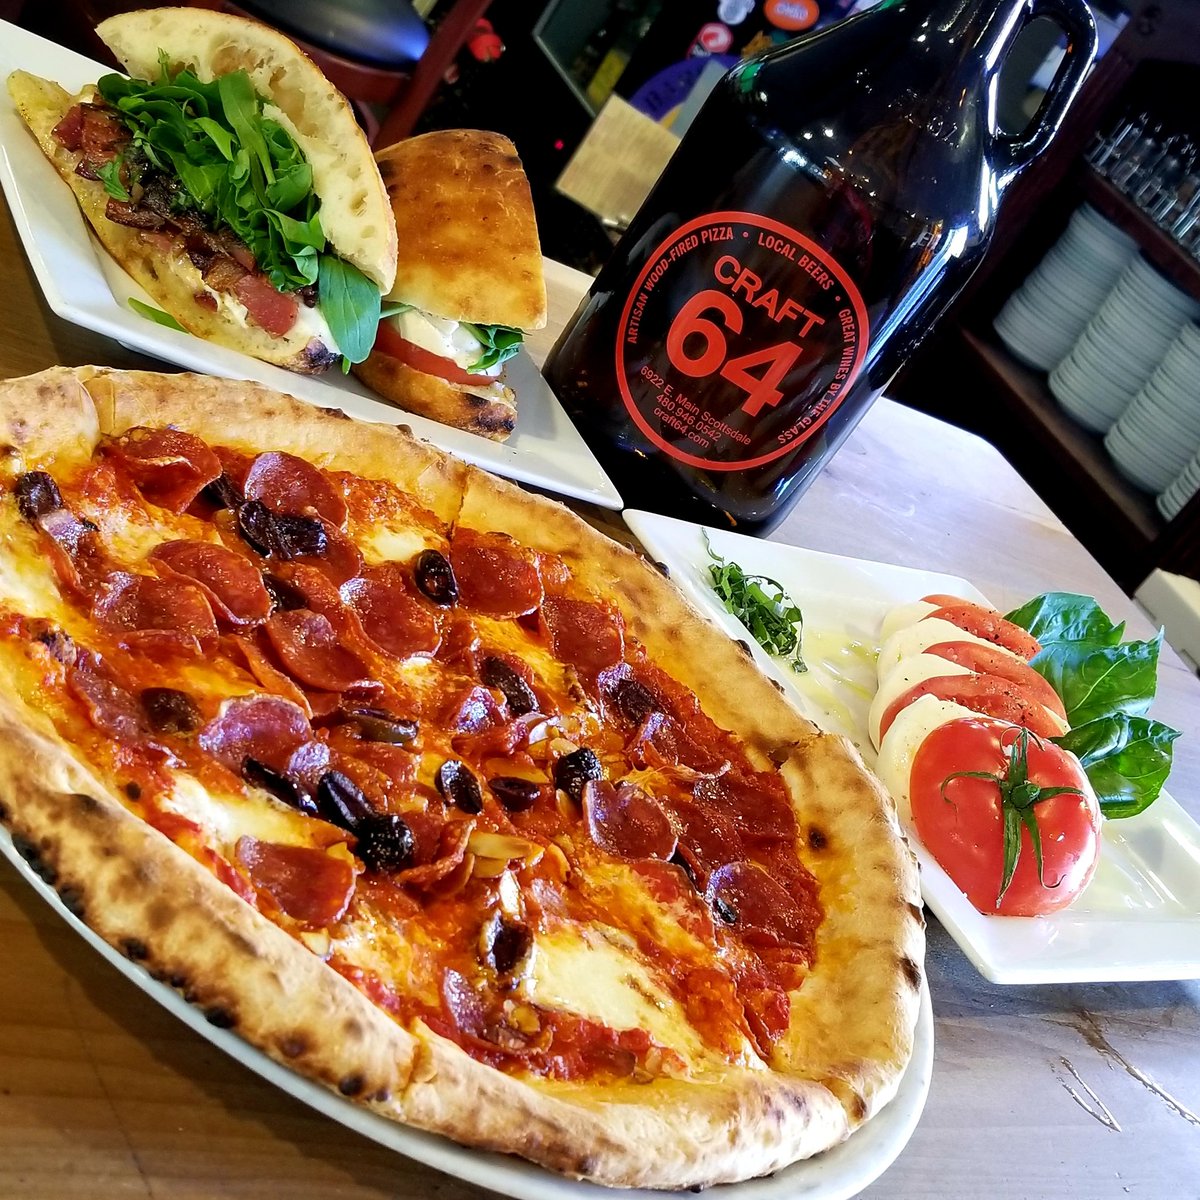 Lunch EVERYDAY @ 11AM!  Join us? #lunch #lovechandler #oldtownscottsdale #pizza #craftbeer #mozzarella #craft64